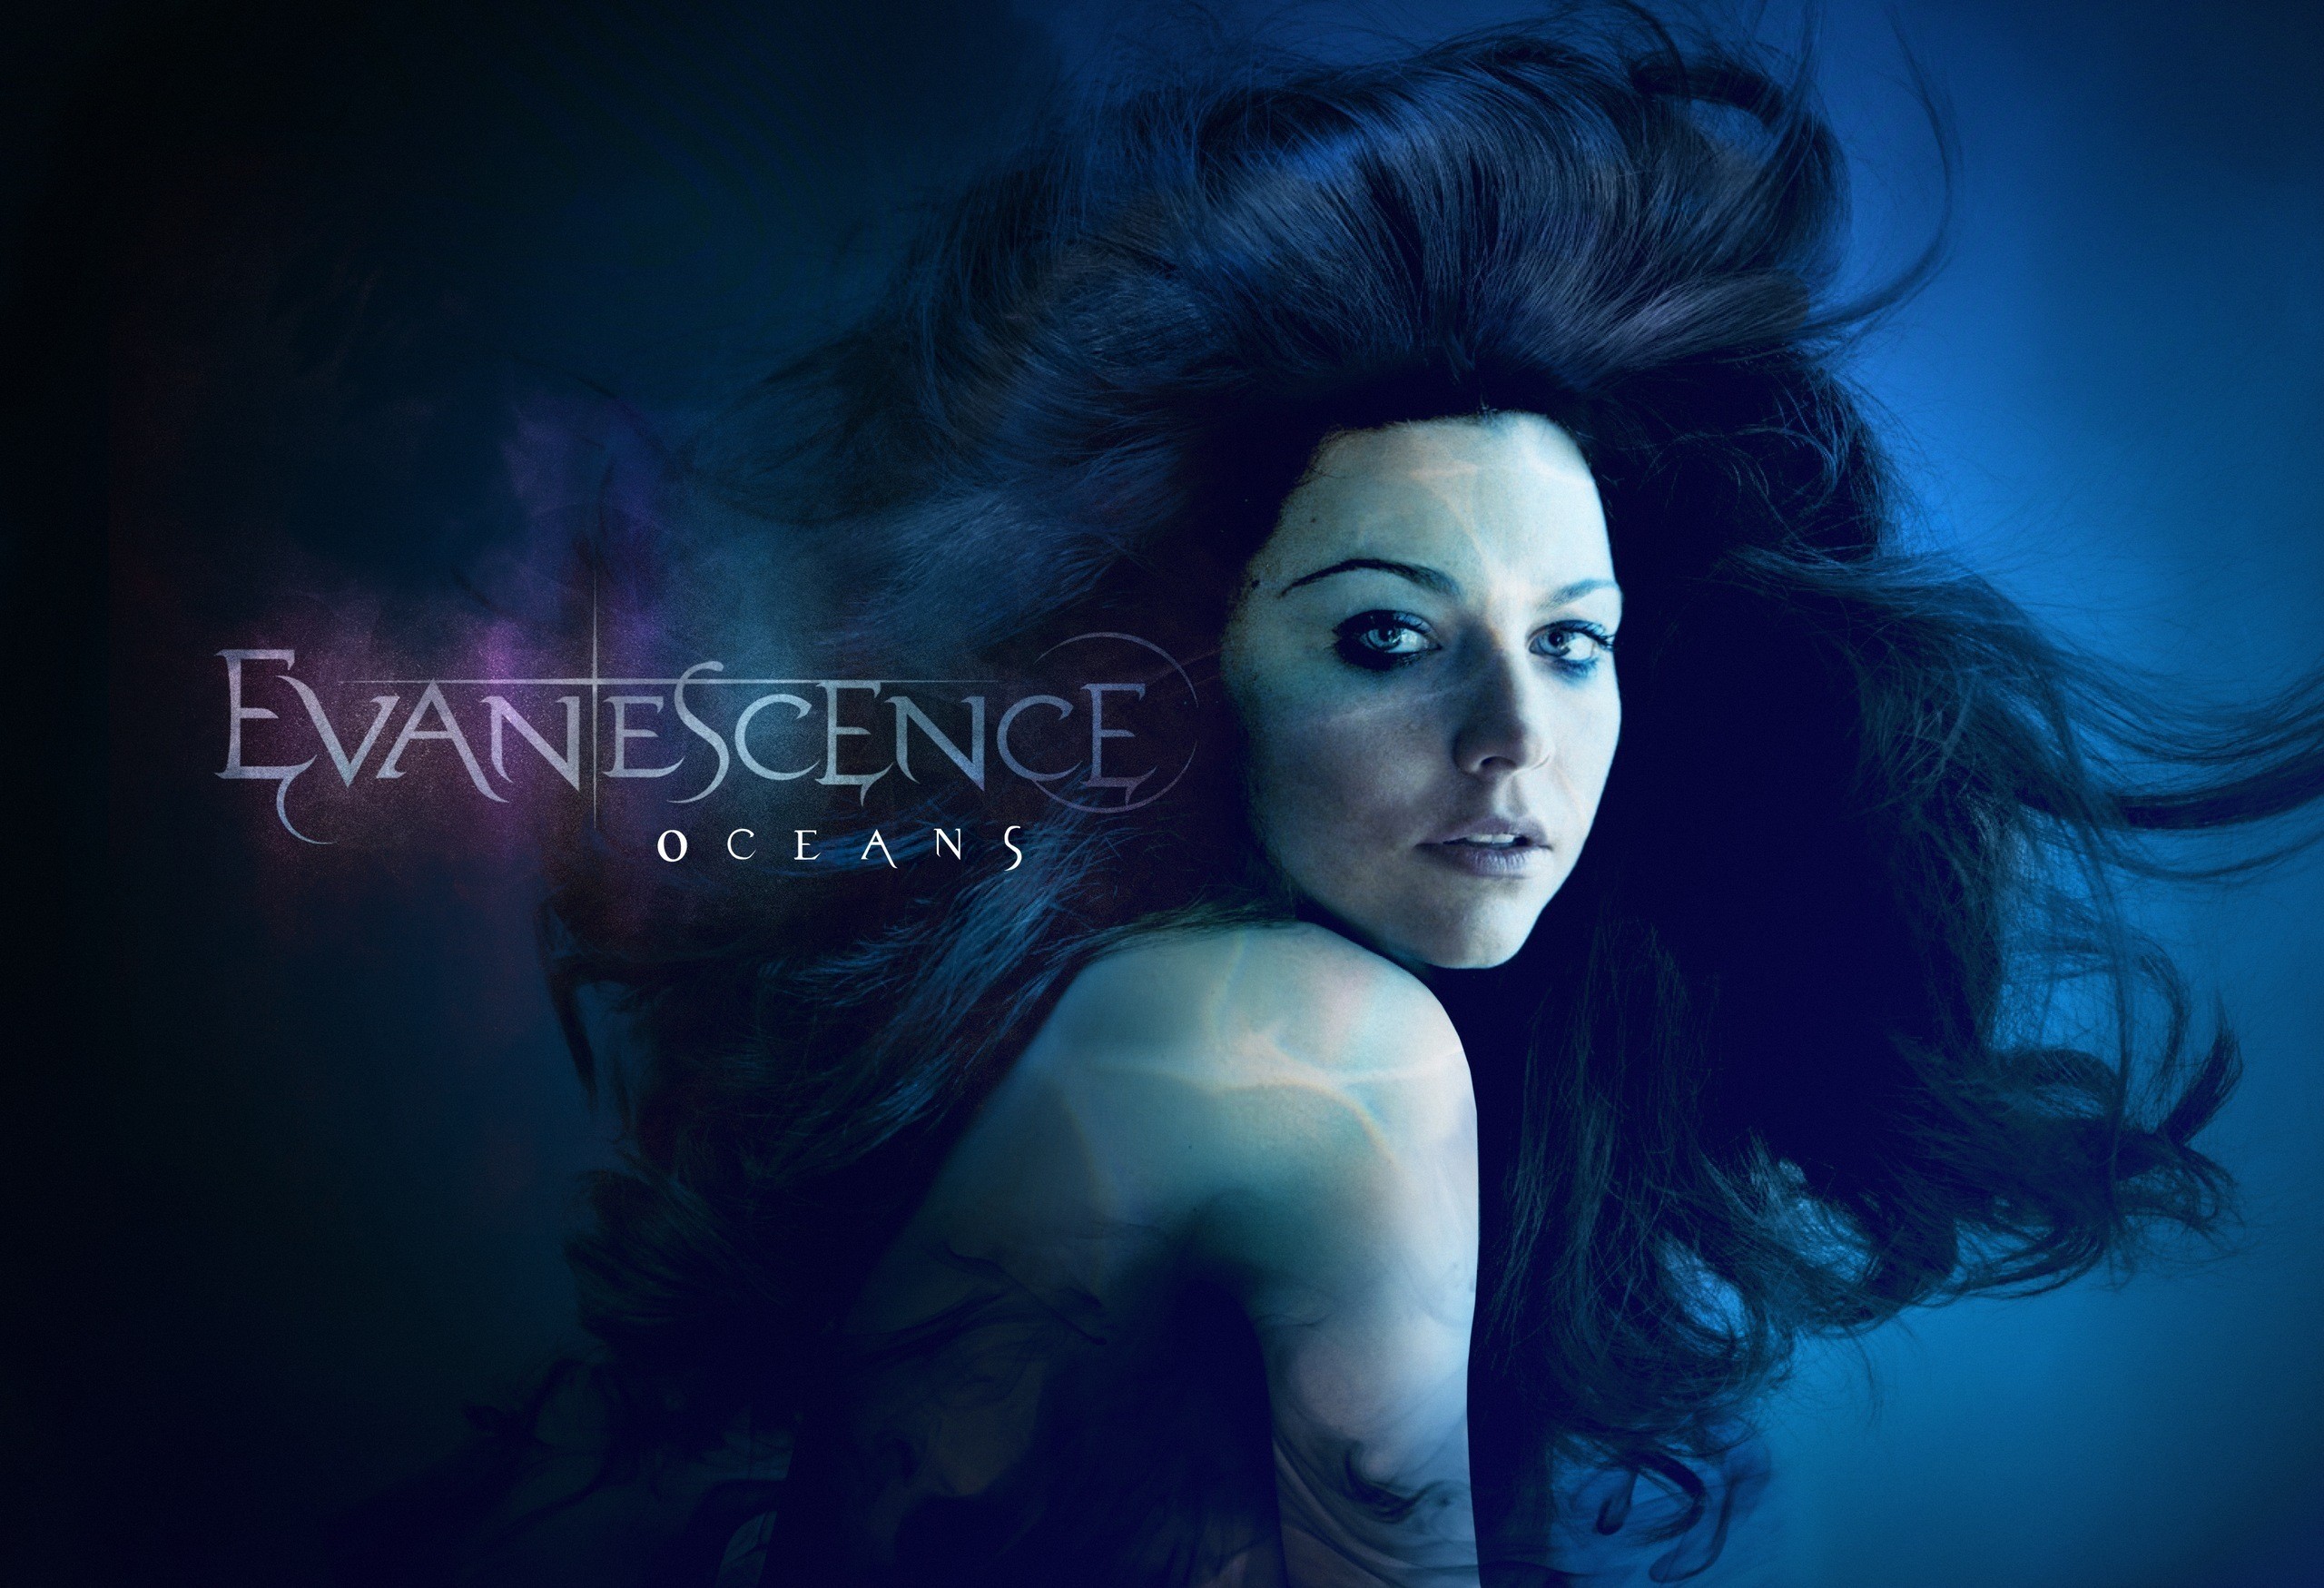 2560x1749 Amy Lee Evanescence Singer Musician Hard Rock Babes Gothic - Image #3616 -  Licence: